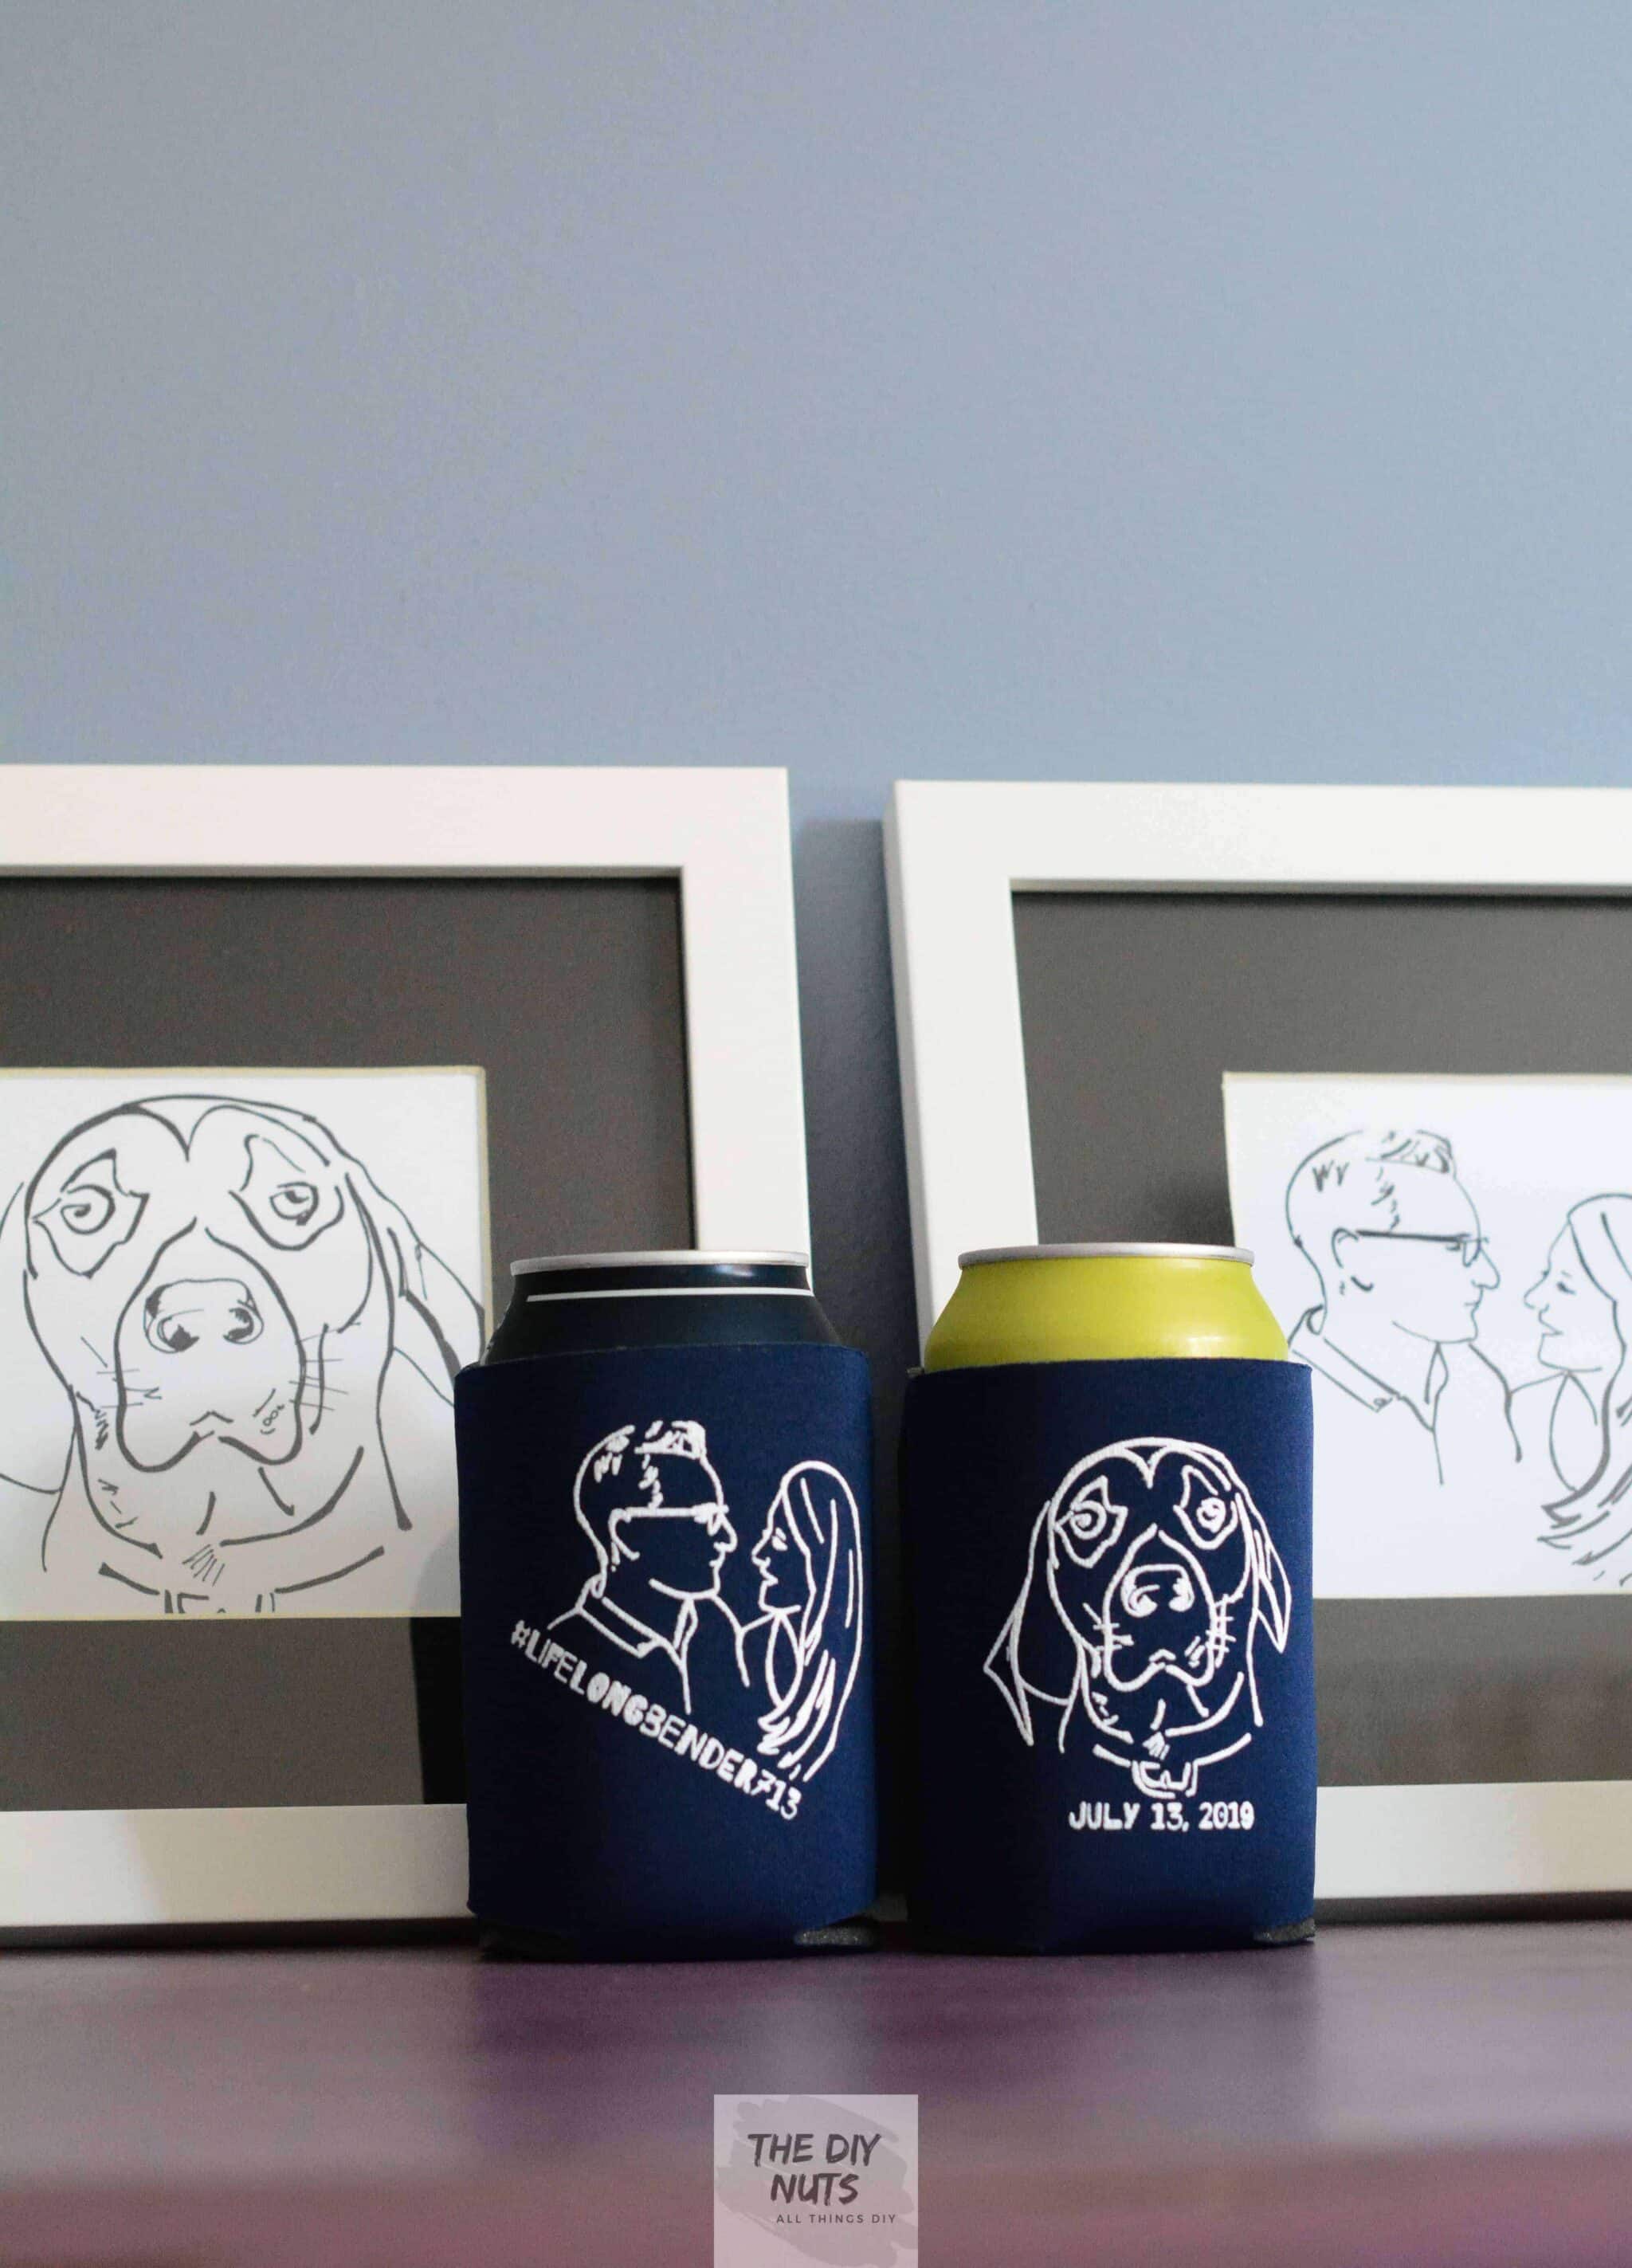 two blue koozies and two framed artworks for diy wedding gift